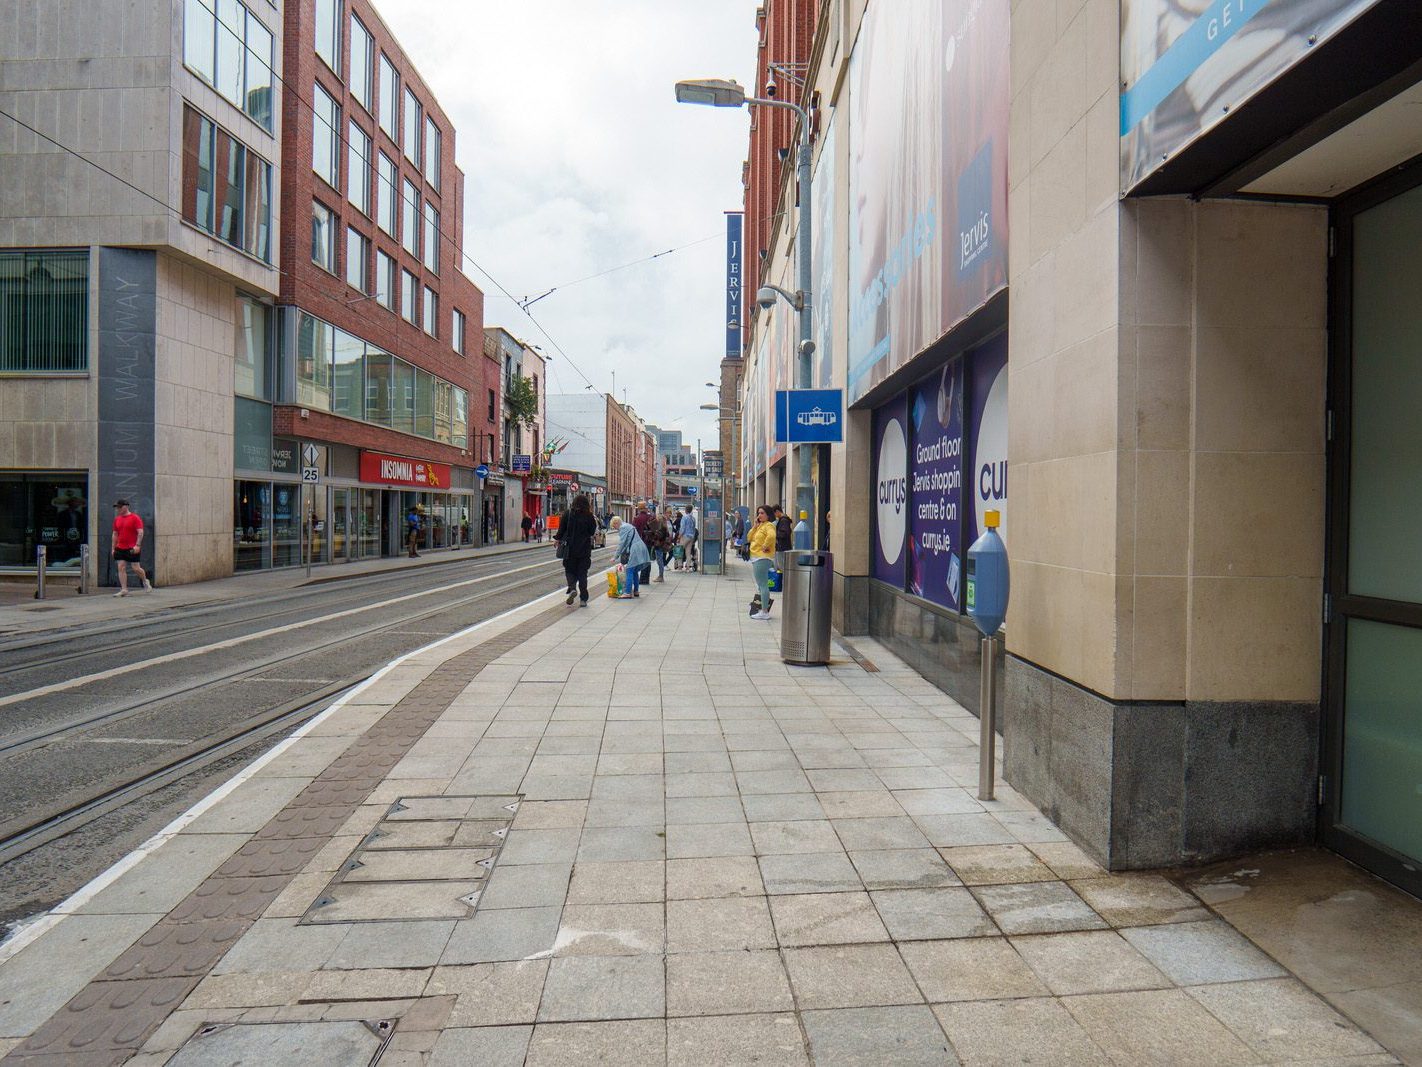 THE LUAS TRAM STOP [KNOWN AS JERVIS EVEN THOUGH IT IS ON UPPER ABBEY STREET] 004